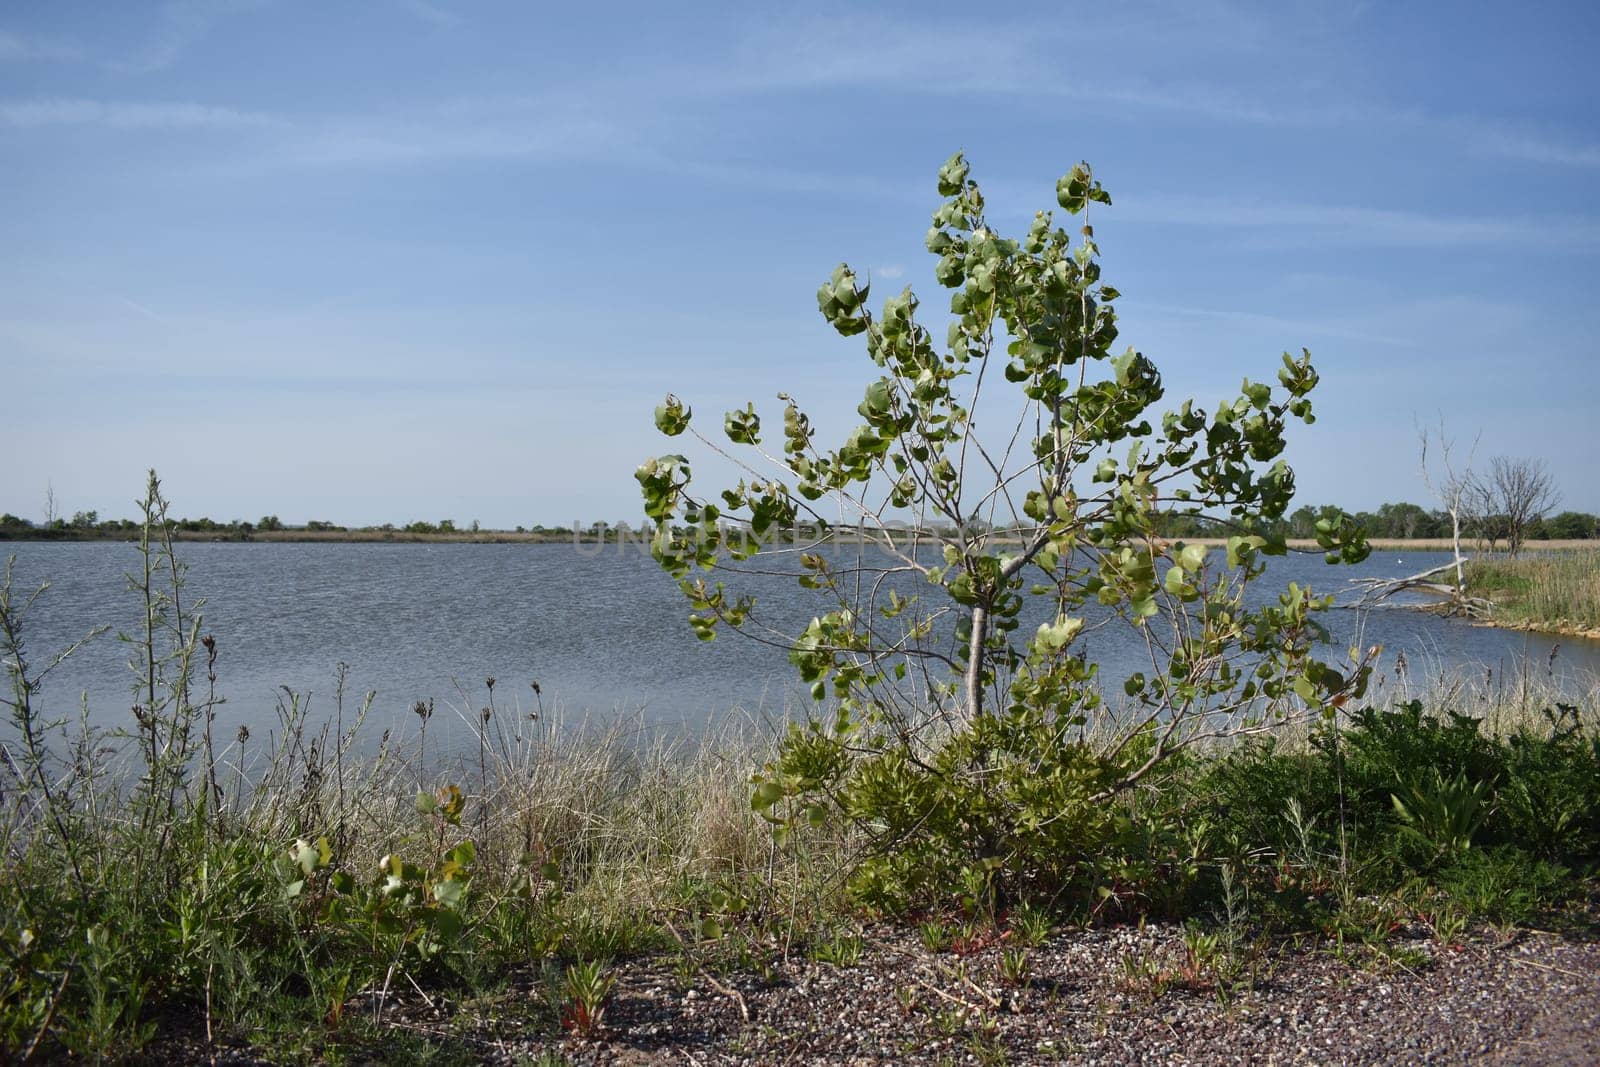 Tree by West Pond at Jamaica Bay Wildlife Refuge in New York. High quality photo